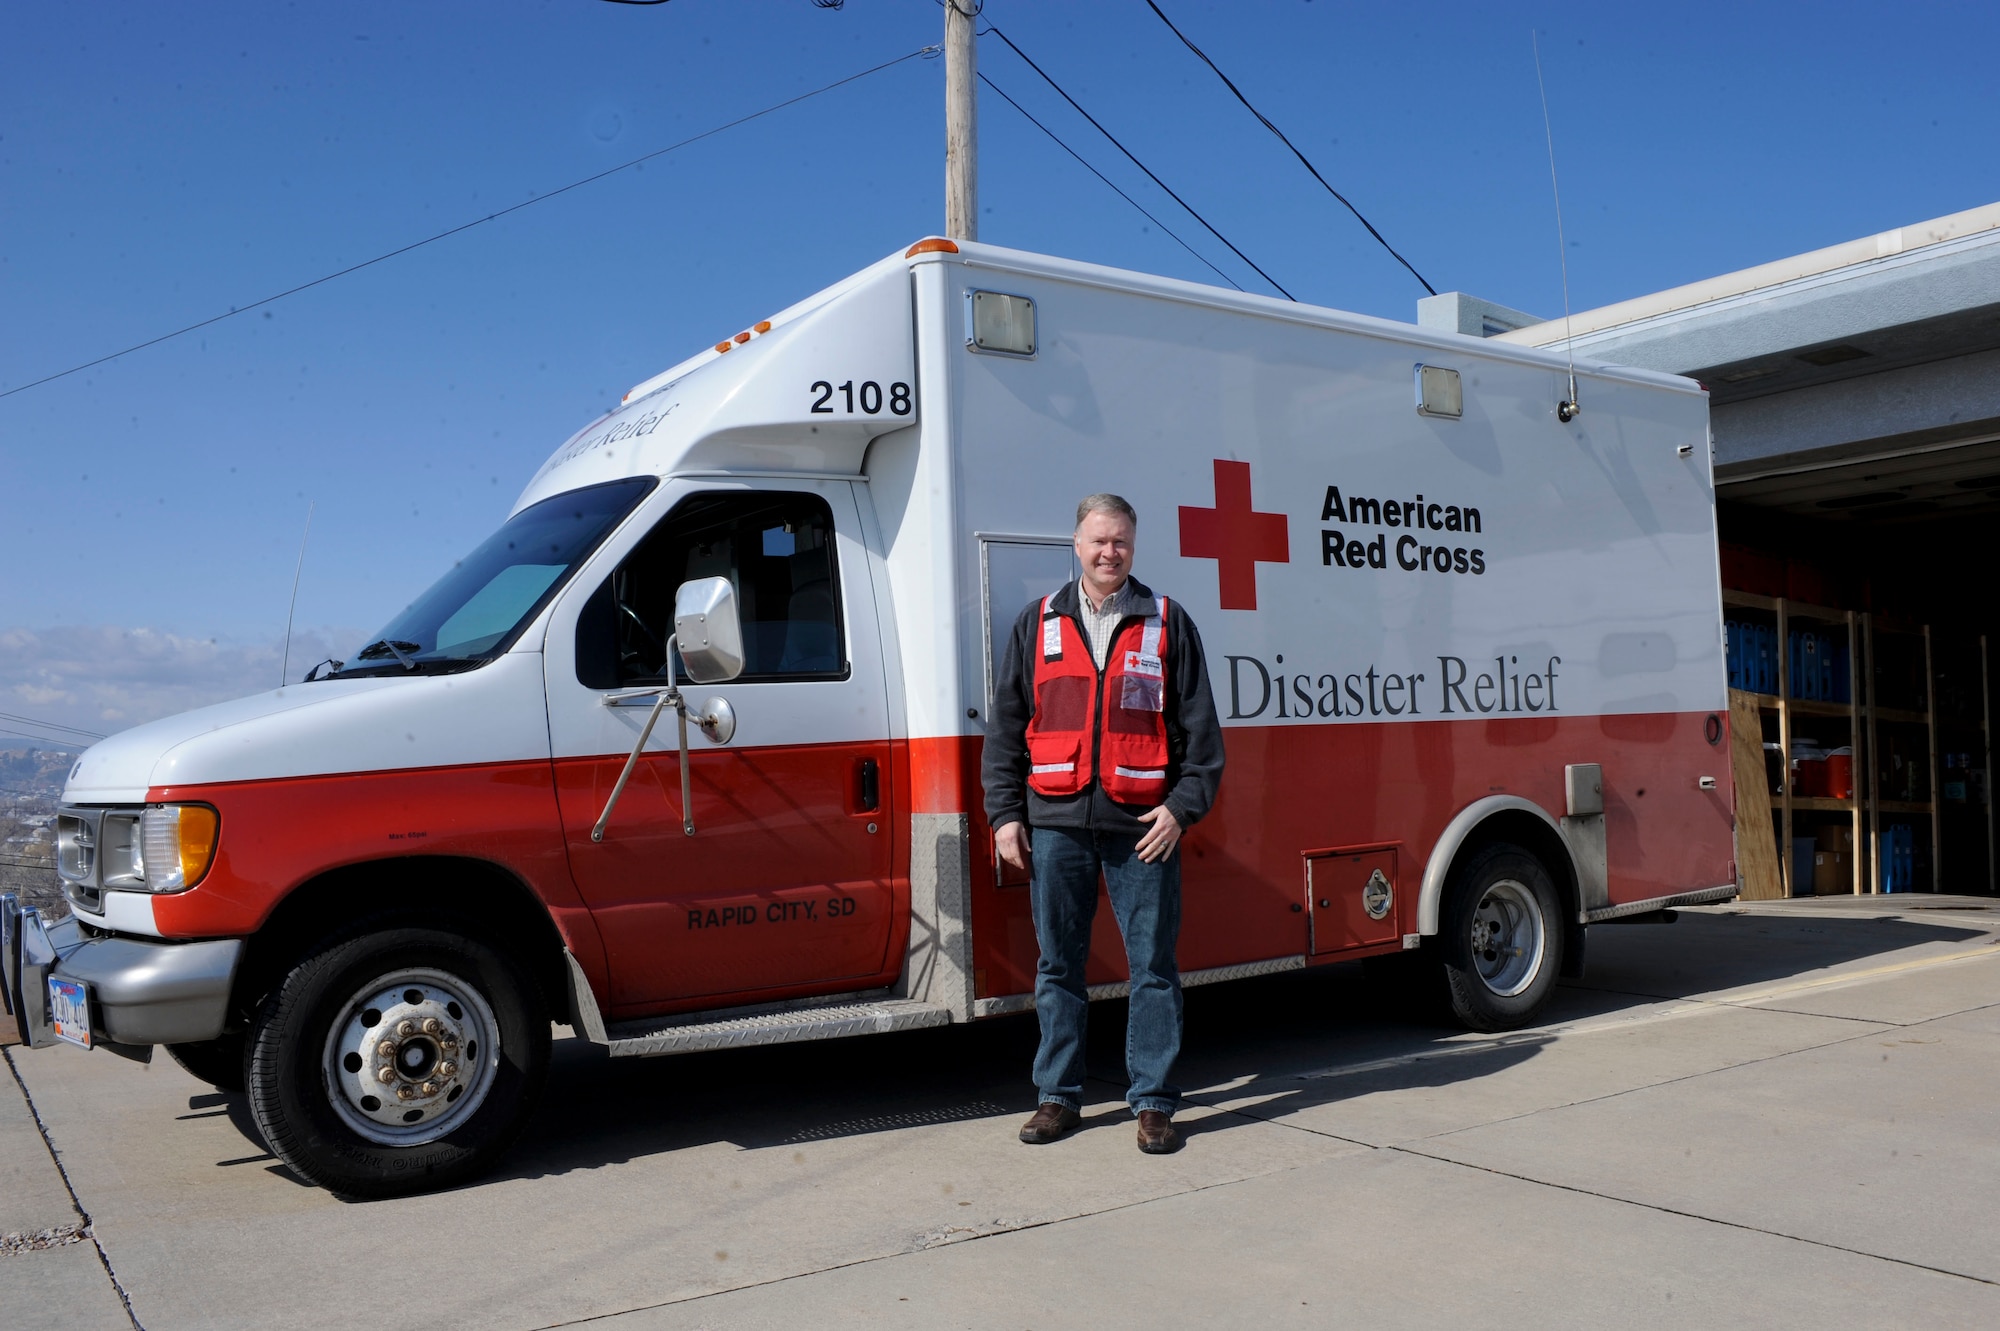 Dan Kuecker, American Red Cross Regional Emergency Services director, stands next to an emergency response vehicle in front of the Black Hills Area Chapter of the ARC in Rapid City, S.D., March 22, 2013. The Black Hills Area Chapter continually seeks volunteers to support efforts during times of crisis. (U.S. Air Force photo by Airman 1st Class Anania Tekurio/Released)